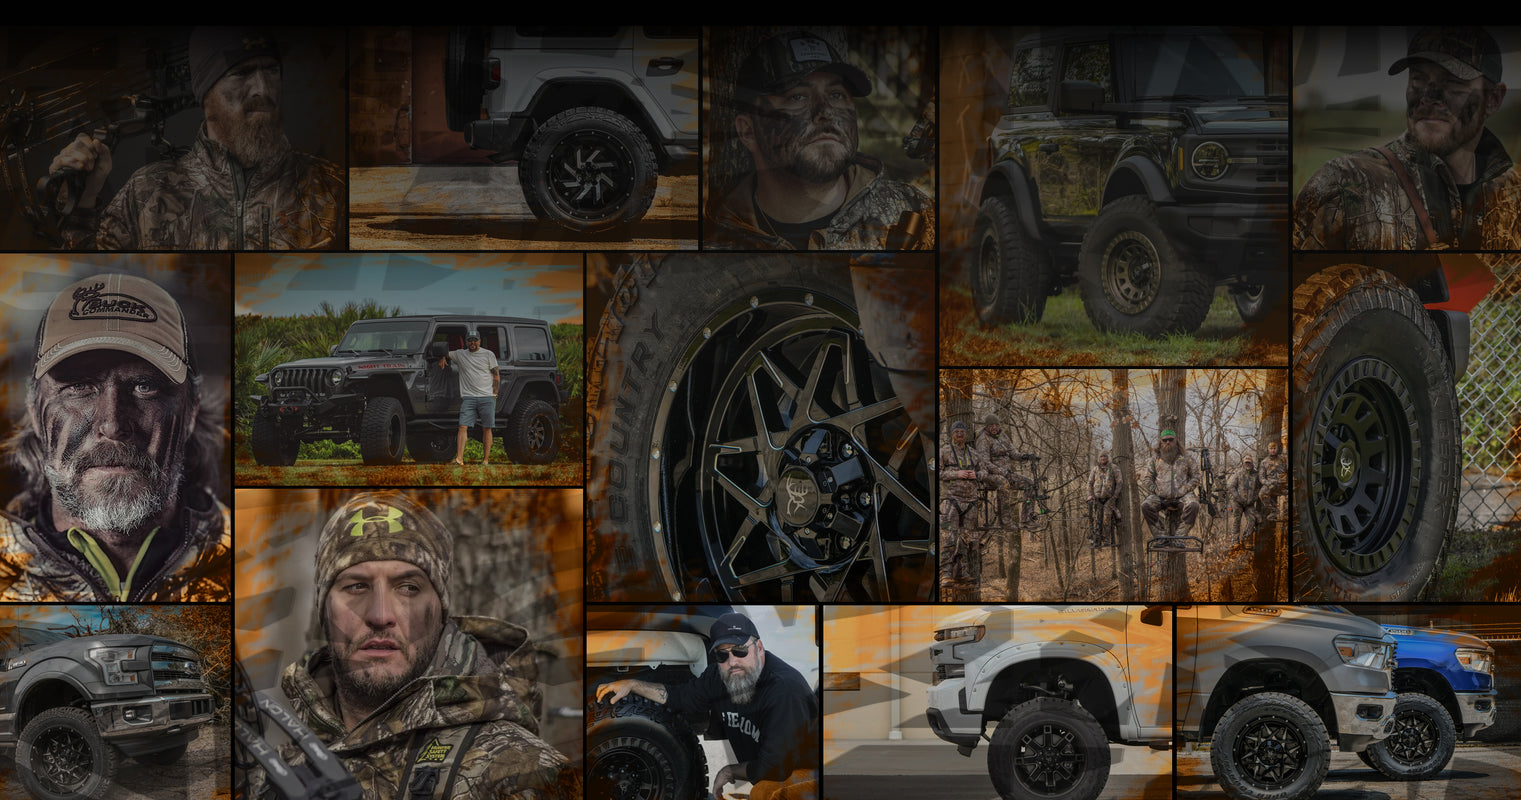 Buck Commander Wheels collage wheels and cast members